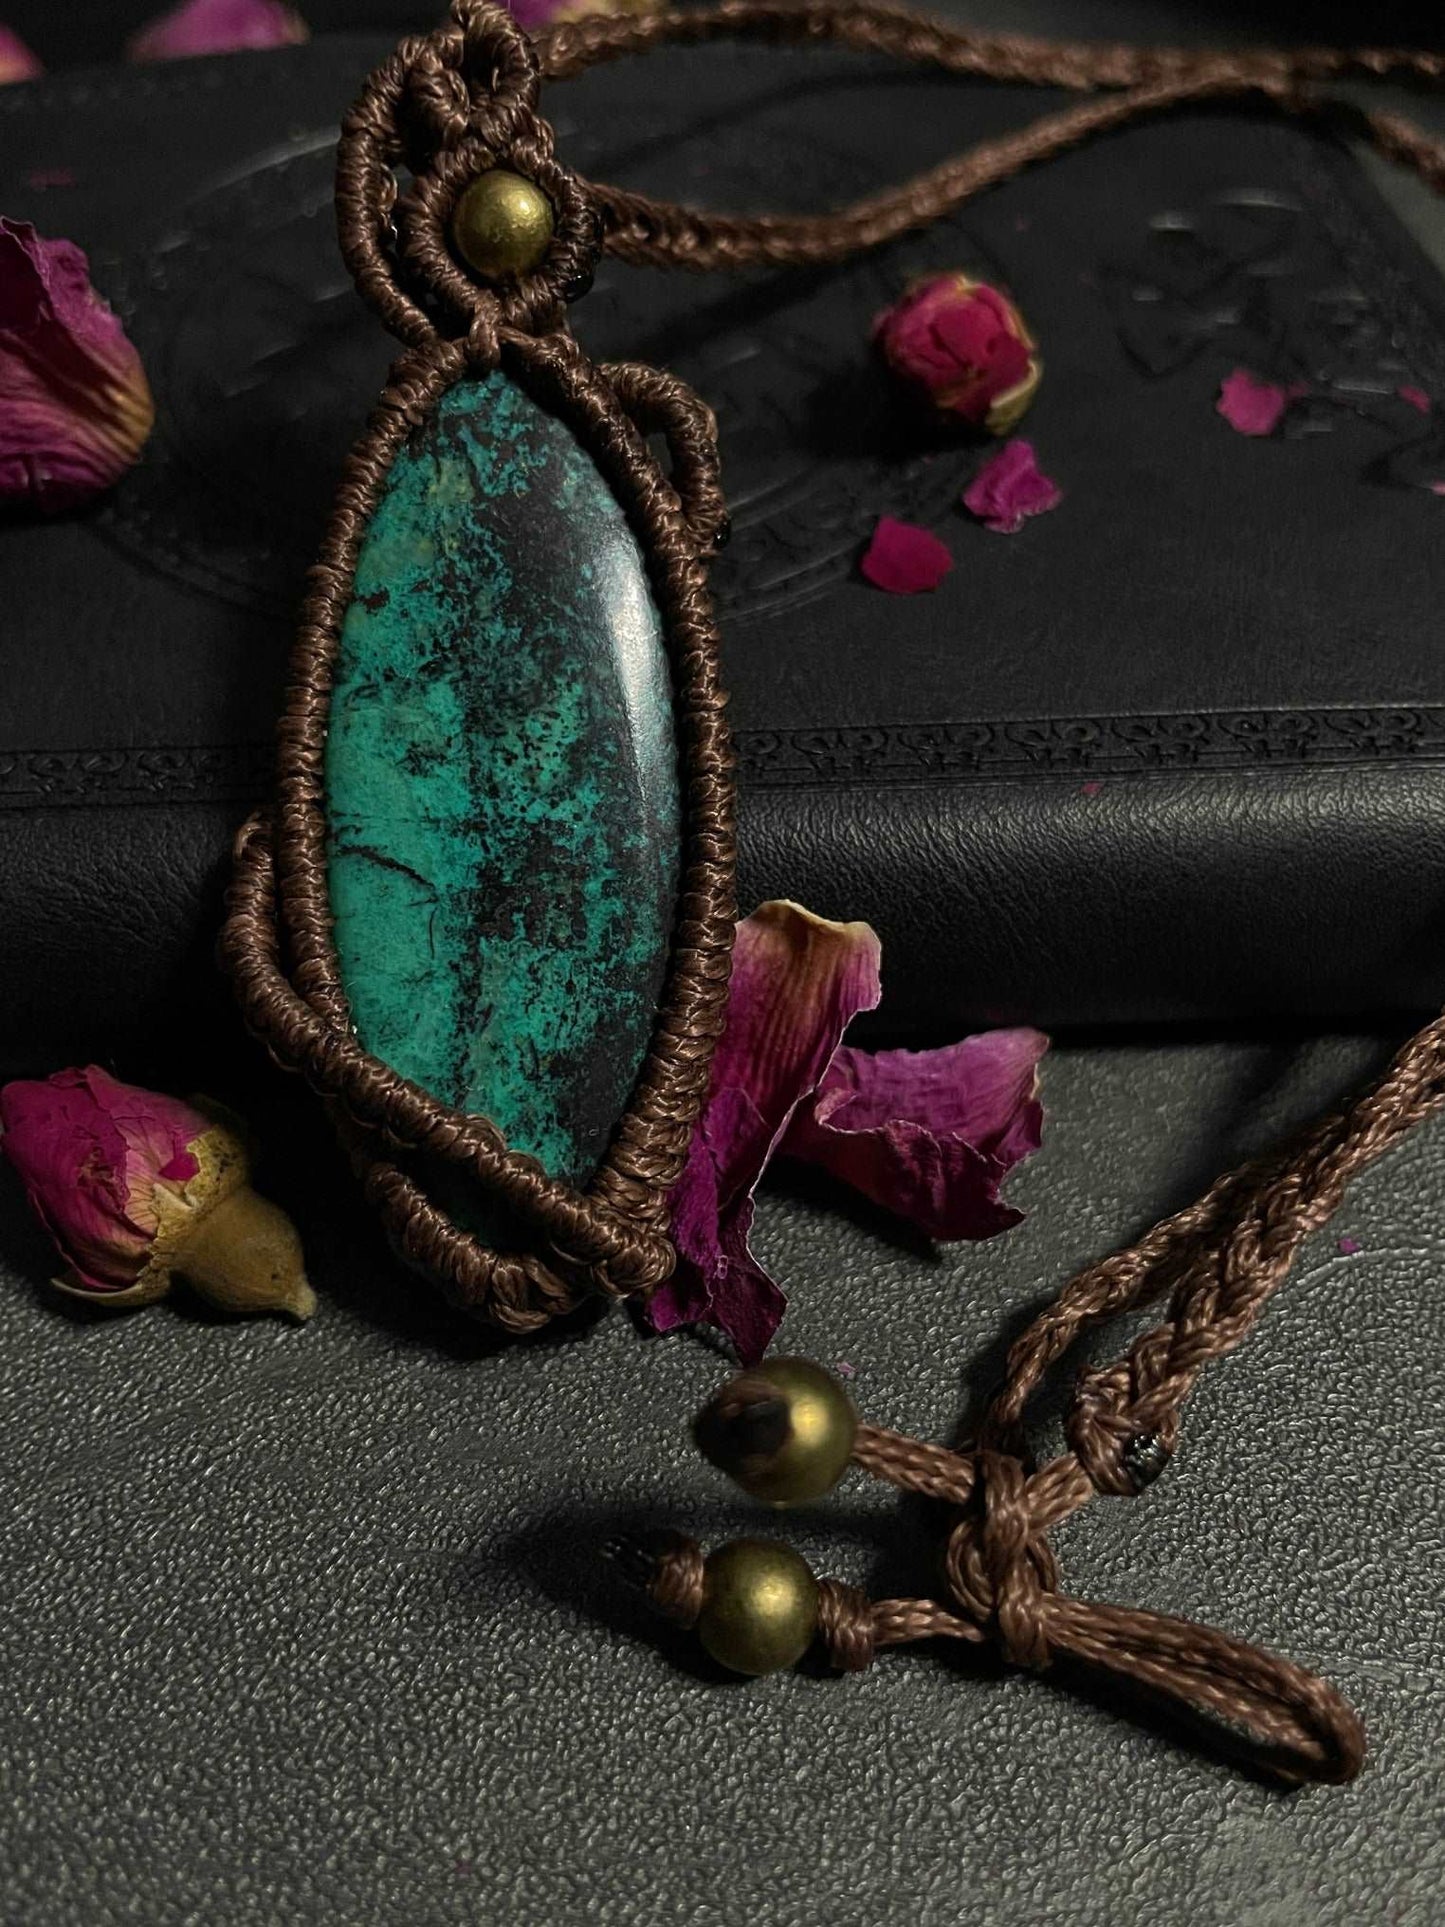 Pictured is a chrysocolla cabochon wrapped in macrame thread. A gothic book and flowers are nearby.